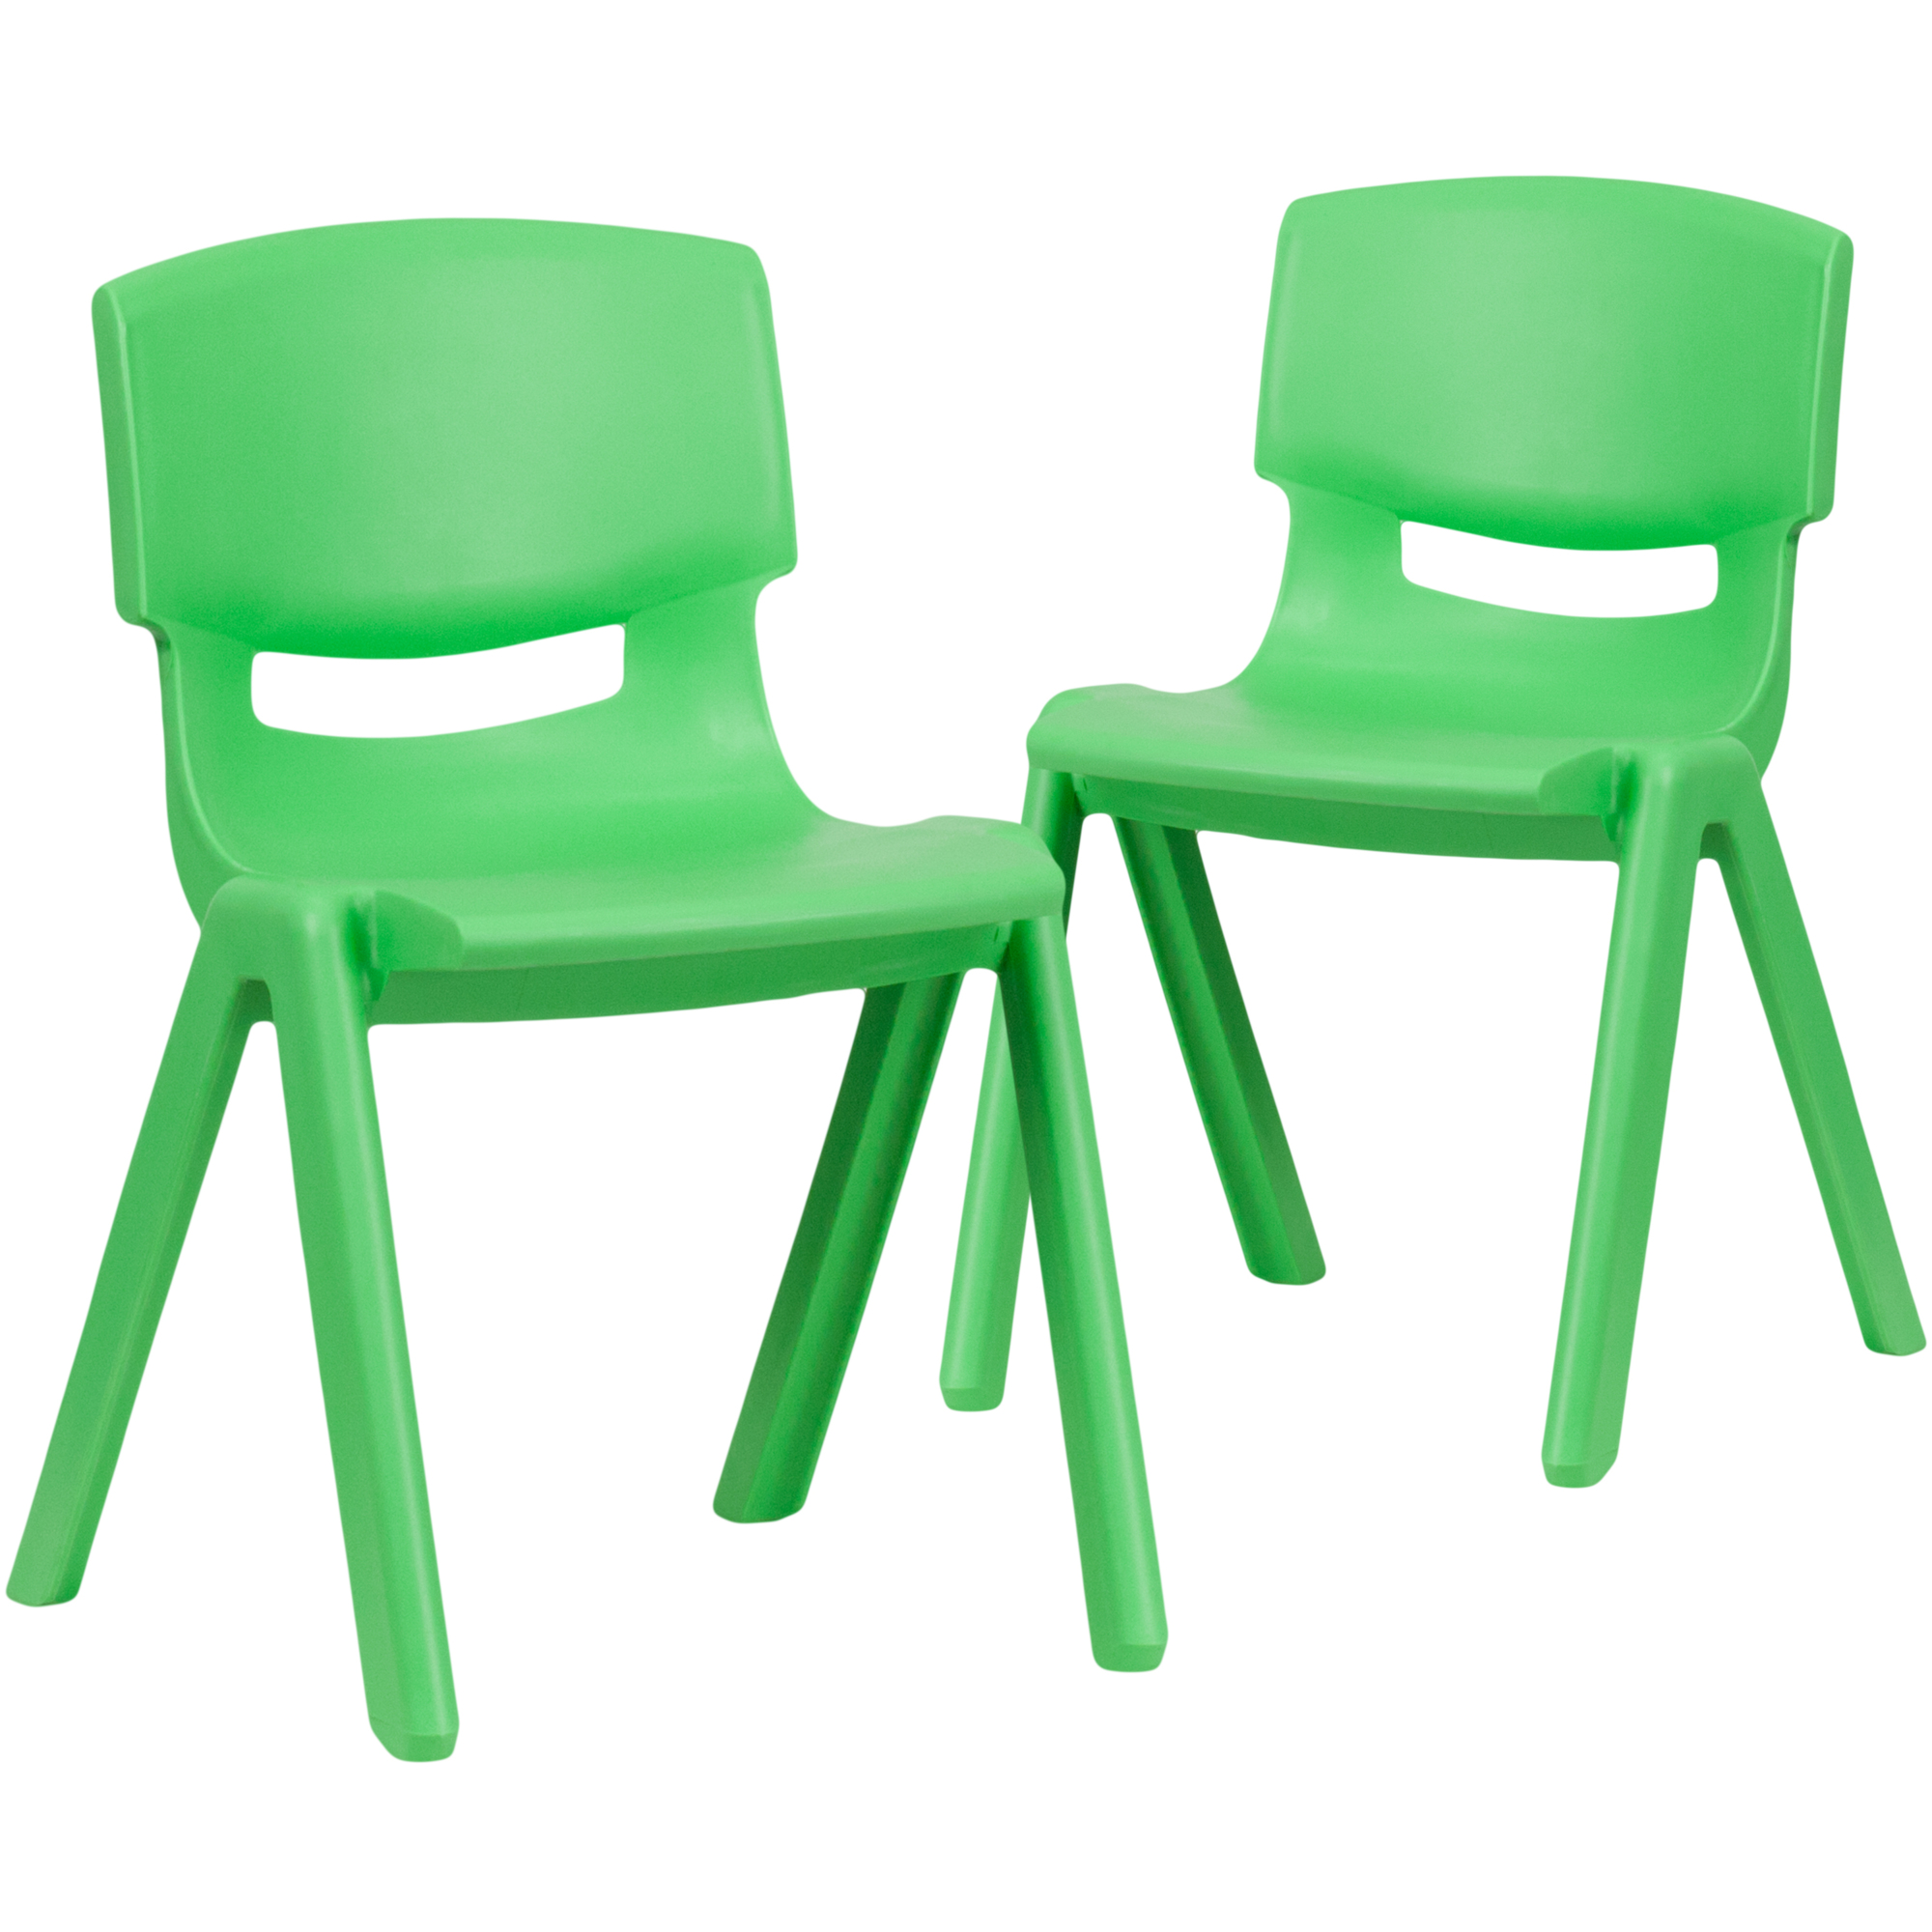 Flash Furniture, 2 Pack Green Stack School Chair-13.25Inch H Seat, Primary Color Green, Included (qty.) 2, Model 2YUYCX004GREEN